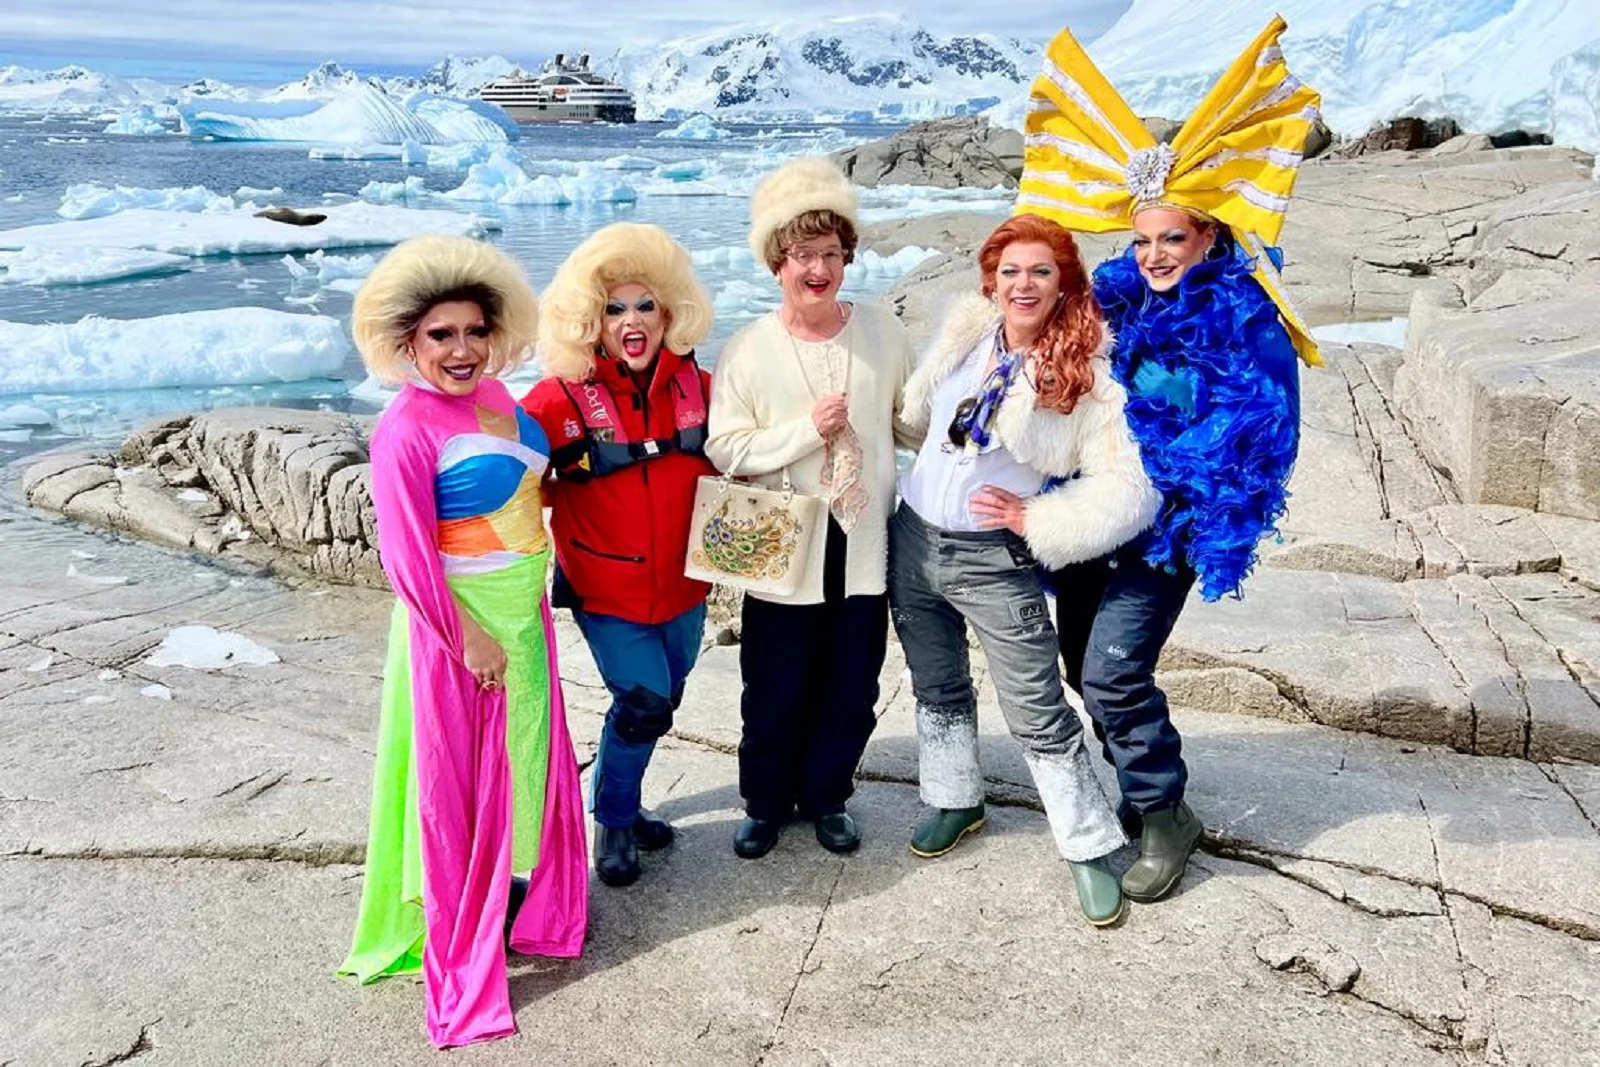 On the first all-LGBTQ+ trip to the White Continent, a "kaboodle" of drag queens take over Antarctica.